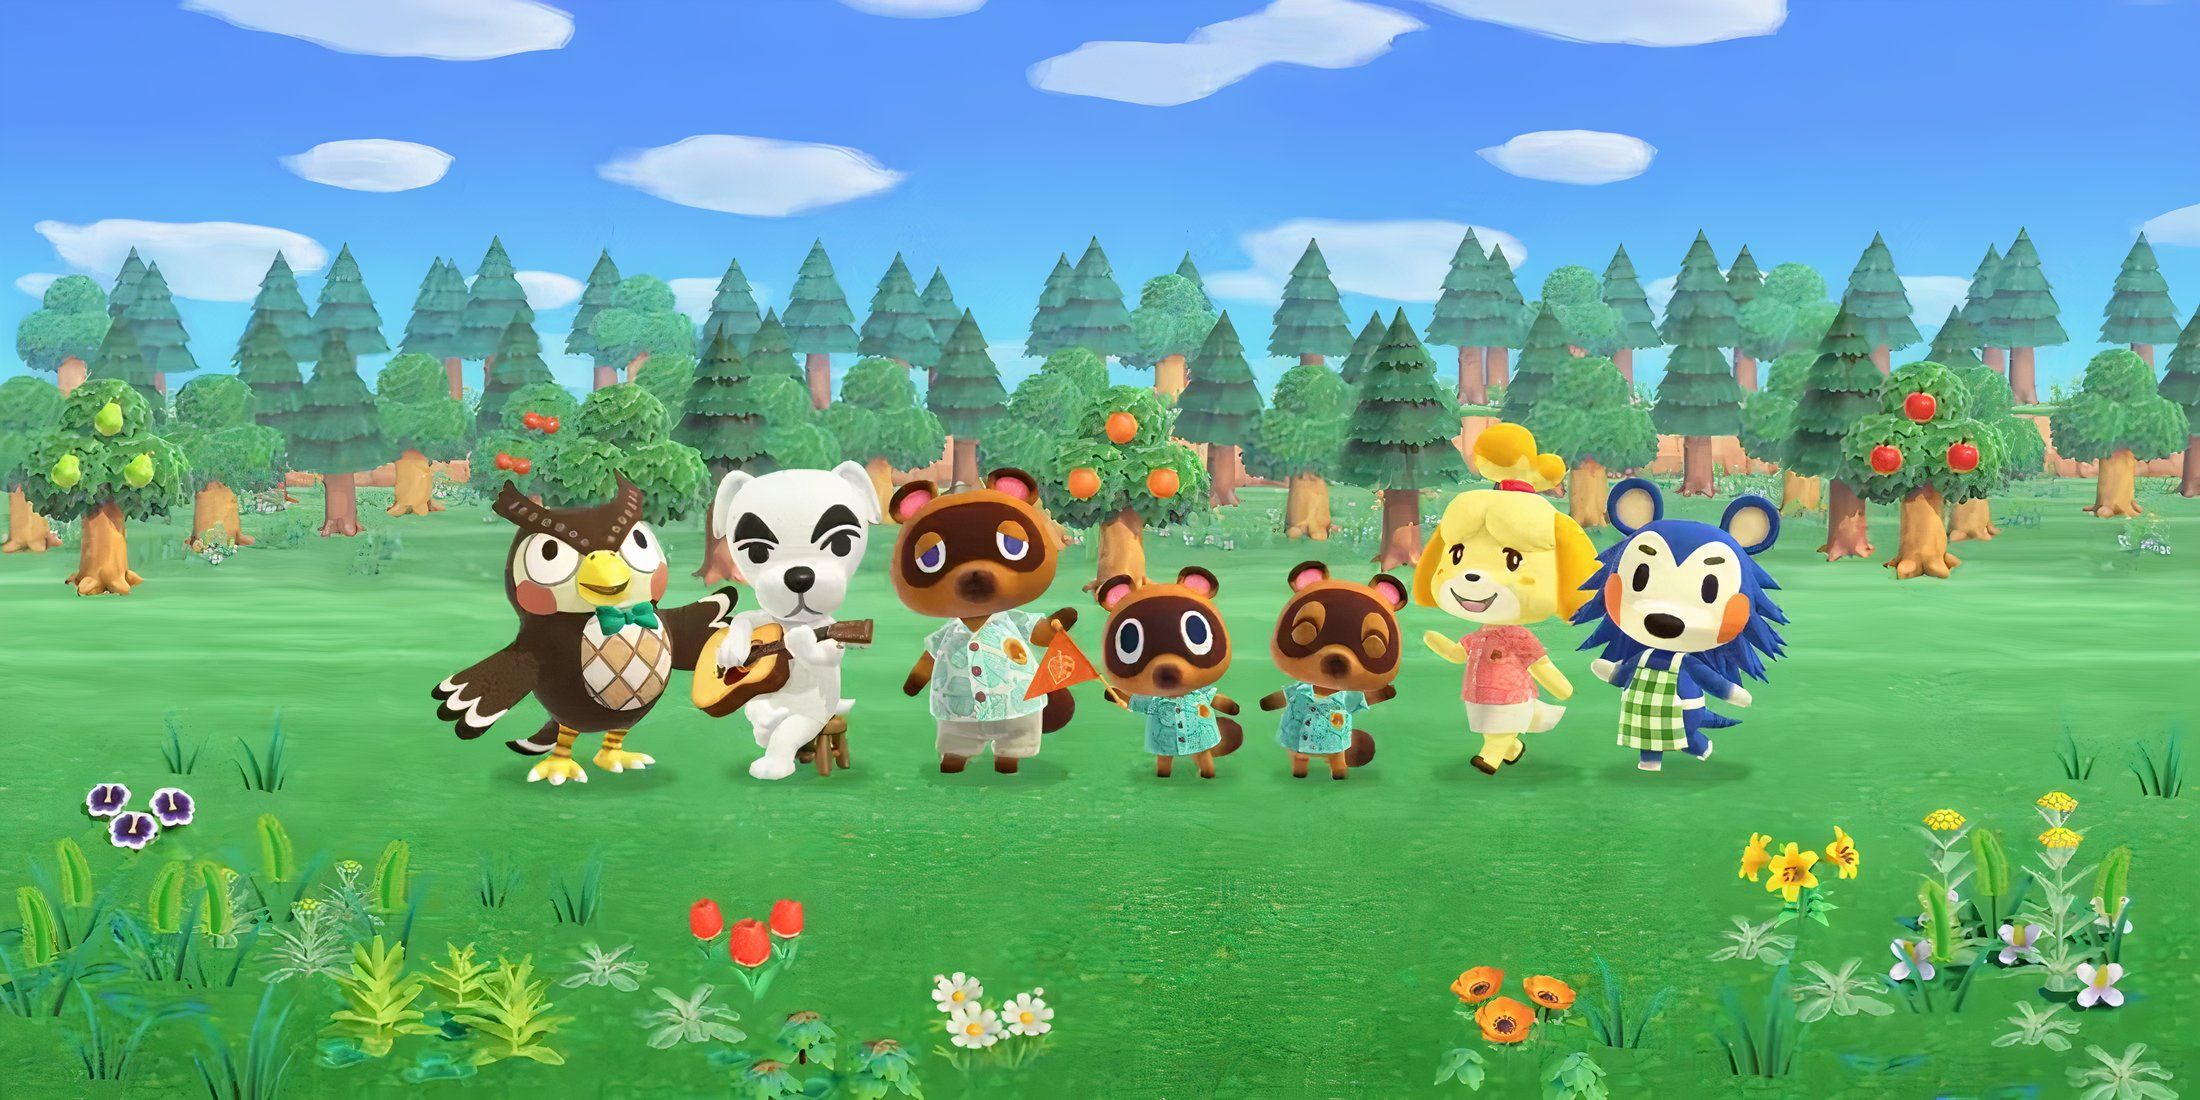 Animal Crossing fans should keep an eye out for a new Switch game coming October 31. Thumbnail